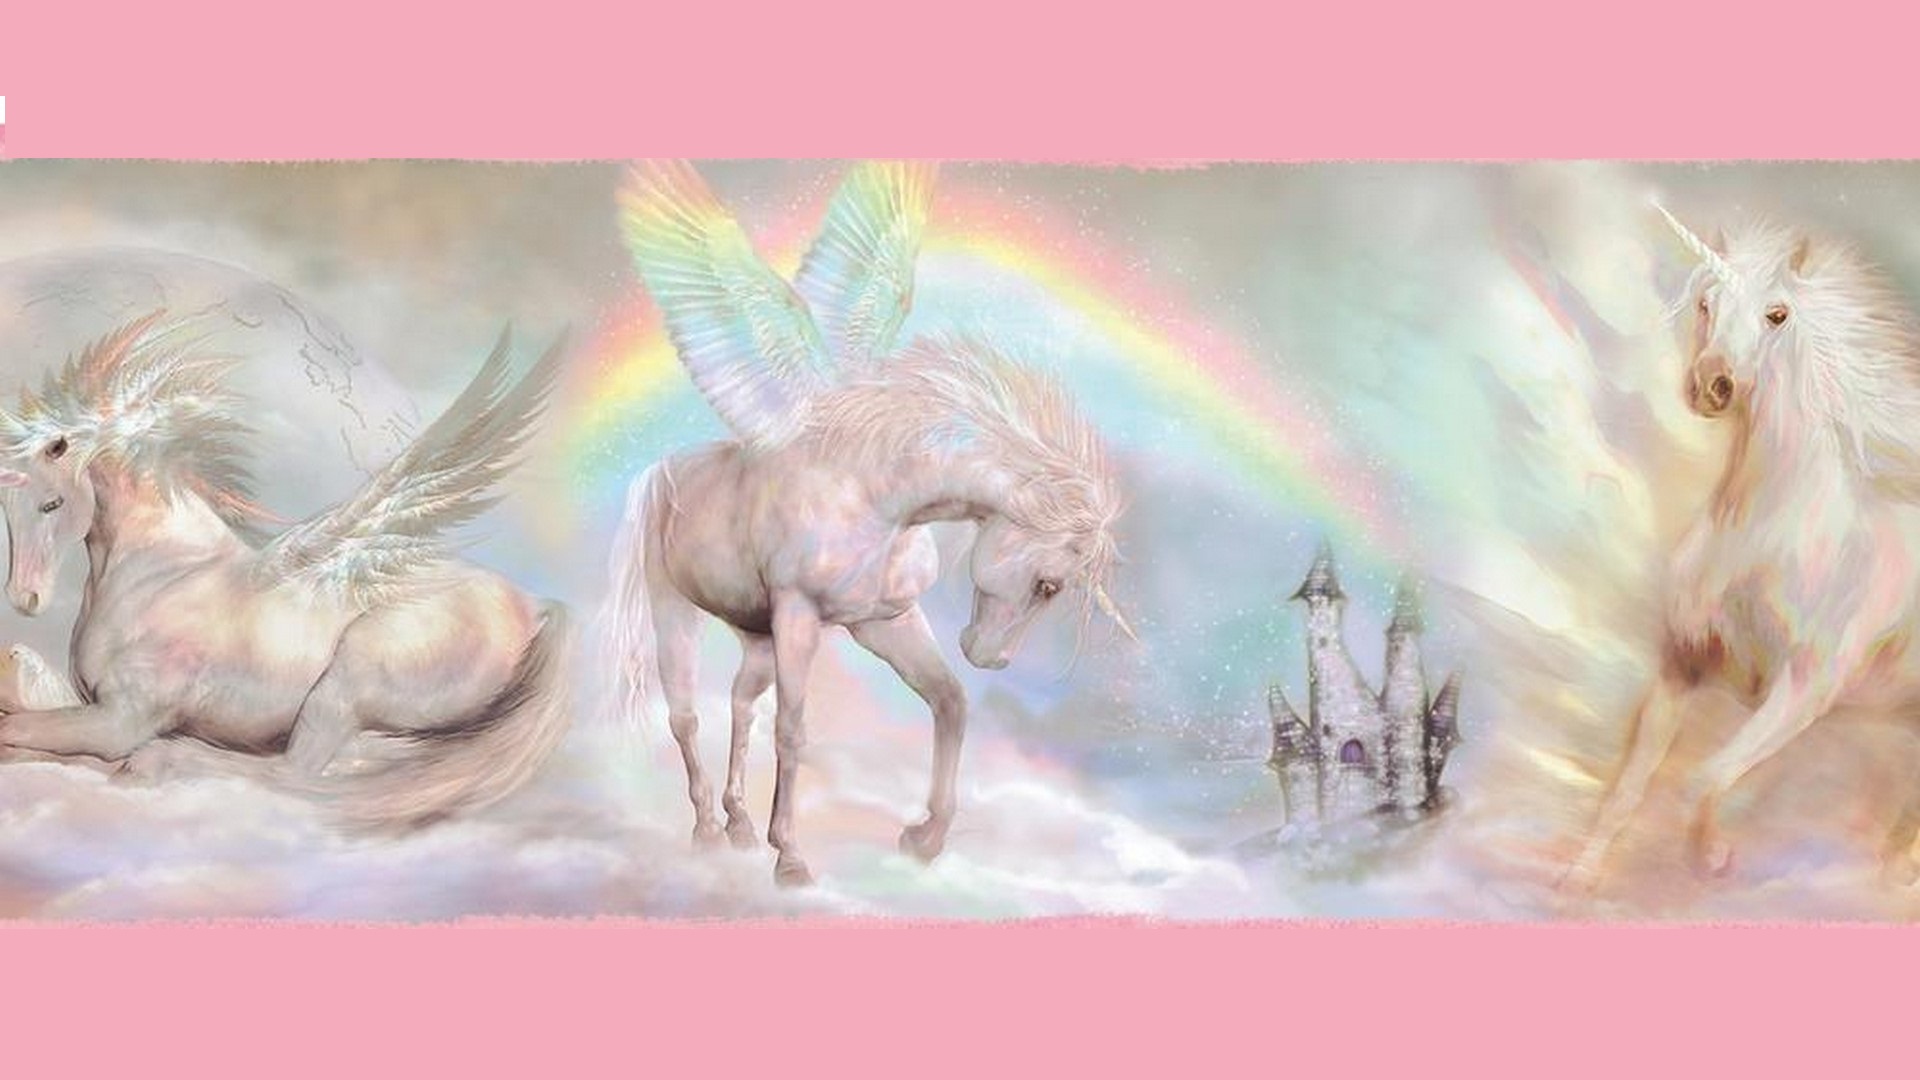 Cute Girly Unicorn HD Wallpaper With high-resolution 1920X1080 pixel. You can use this wallpaper for your Desktop Computer Backgrounds, Mac Wallpapers, Android Lock screen or iPhone Screensavers and another smartphone device